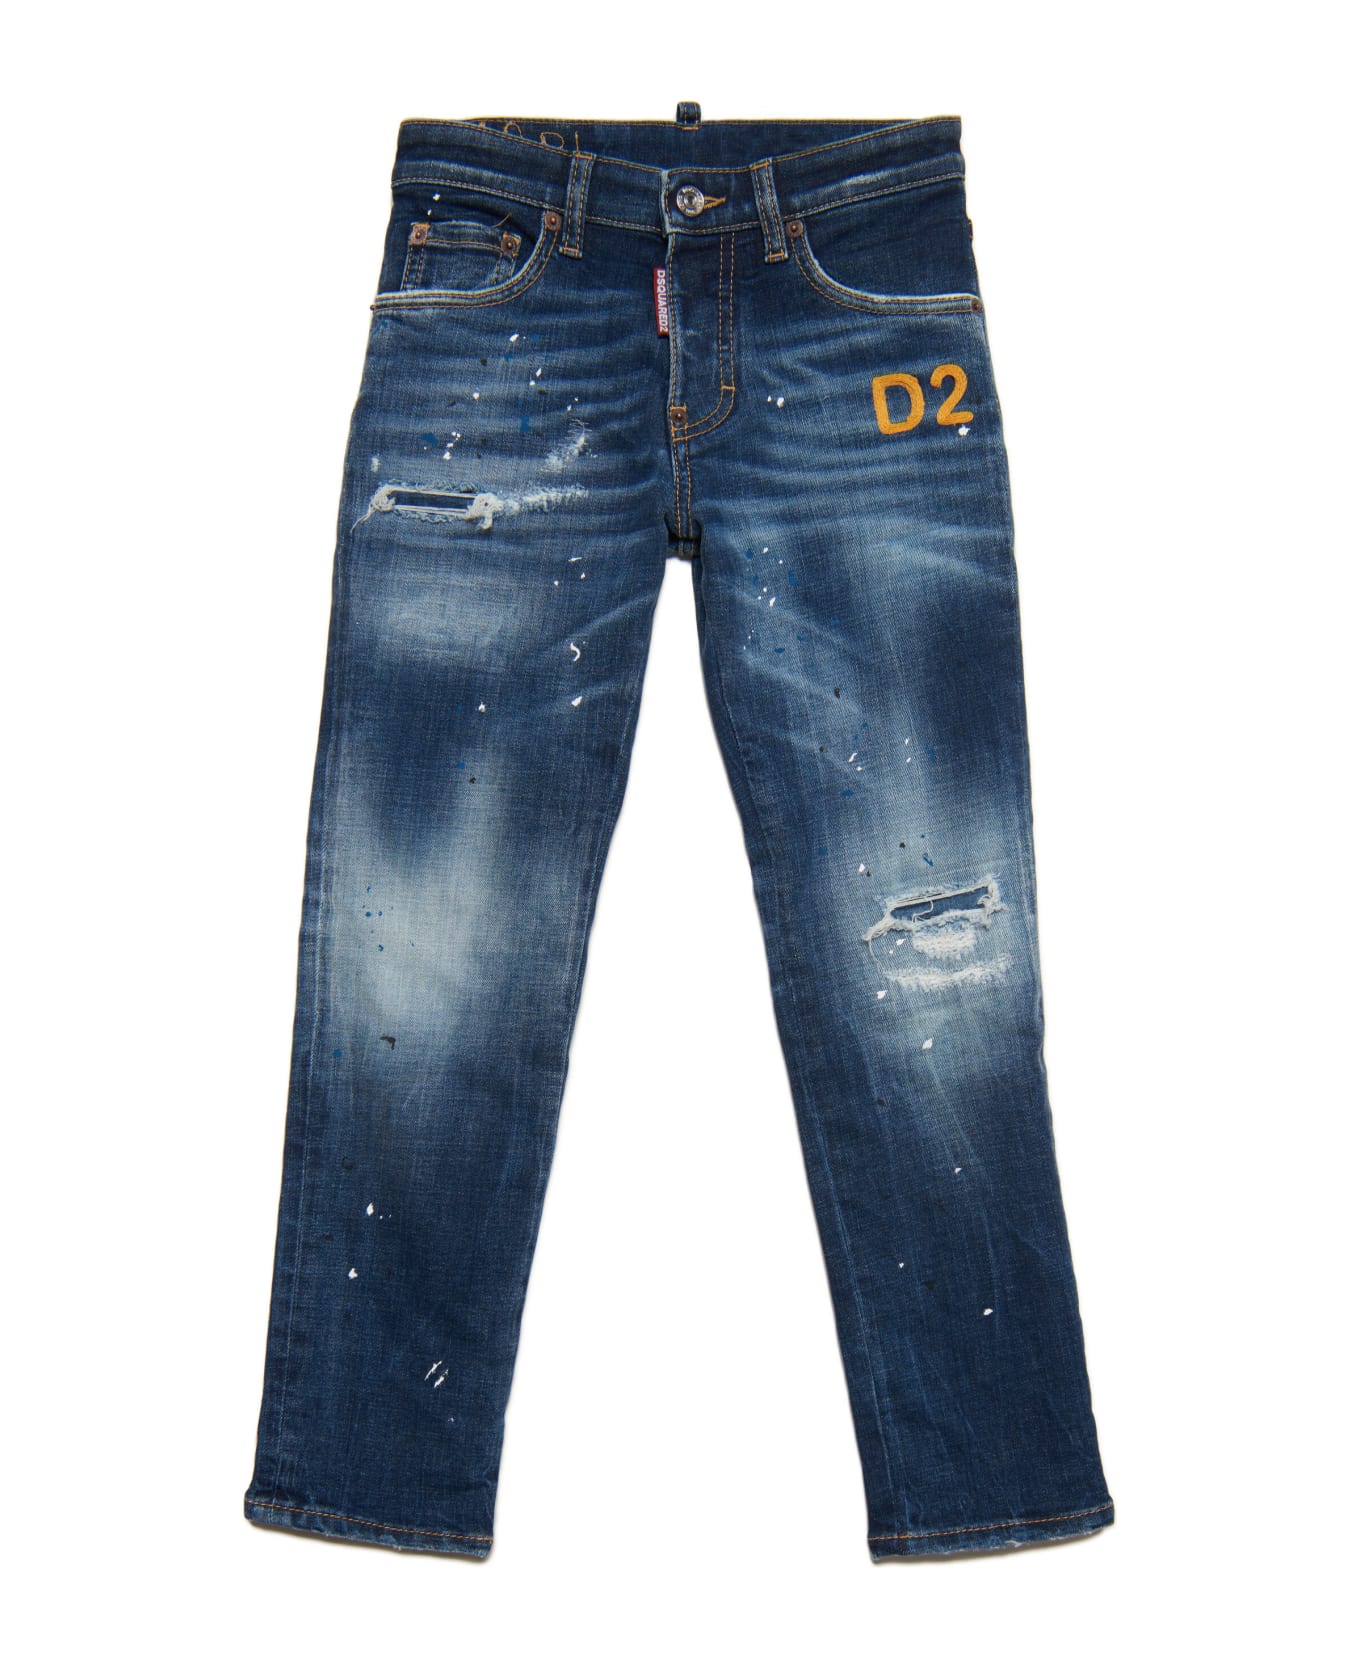 Dsquared2 D2p438u Stanislav Jean Trousers Dsquared Stanislav Jeans Straight Medium Blue Shaded With Breaks And Patches - Blue Denim